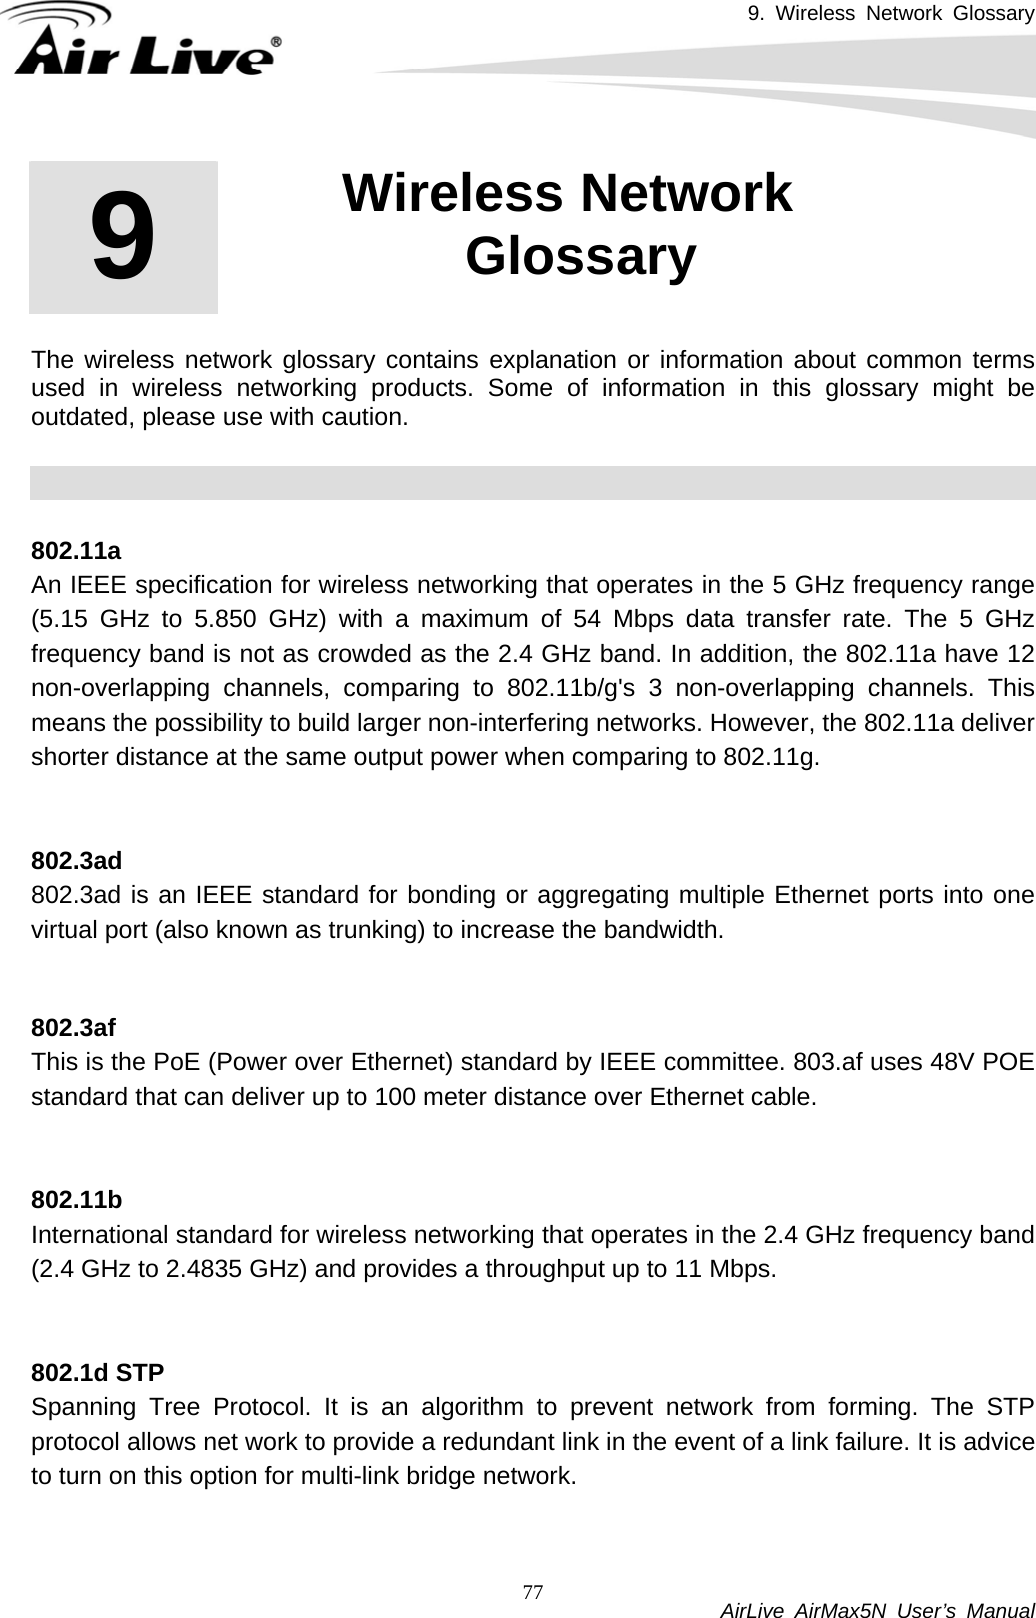 9. Wireless Network Glossary           AirLive AirMax5N User’s Manual 77      The wireless network glossary contains explanation or information about common terms used in wireless networking products. Some of information in this glossary might be outdated, please use with caution.    802.11a An IEEE specification for wireless networking that operates in the 5 GHz frequency range (5.15 GHz to 5.850 GHz) with a maximum of 54 Mbps data transfer rate. The 5 GHz frequency band is not as crowded as the 2.4 GHz band. In addition, the 802.11a have 12 non-overlapping channels, comparing to 802.11b/g&apos;s 3 non-overlapping channels. This means the possibility to build larger non-interfering networks. However, the 802.11a deliver shorter distance at the same output power when comparing to 802.11g.   802.3ad 802.3ad is an IEEE standard for bonding or aggregating multiple Ethernet ports into one virtual port (also known as trunking) to increase the bandwidth.   802.3af This is the PoE (Power over Ethernet) standard by IEEE committee. 803.af uses 48V POE standard that can deliver up to 100 meter distance over Ethernet cable.   802.11bInternational standard for wireless networking that operates in the 2.4 GHz frequency band (2.4 GHz to 2.4835 GHz) and provides a throughput up to 11 Mbps.     802.1d STPSpanning Tree Protocol. It is an algorithm to prevent network from forming. The STP protocol allows net work to provide a redundant link in the event of a link failure. It is advice to turn on this option for multi-link bridge network.   9  9. Wireless Network Glossary  